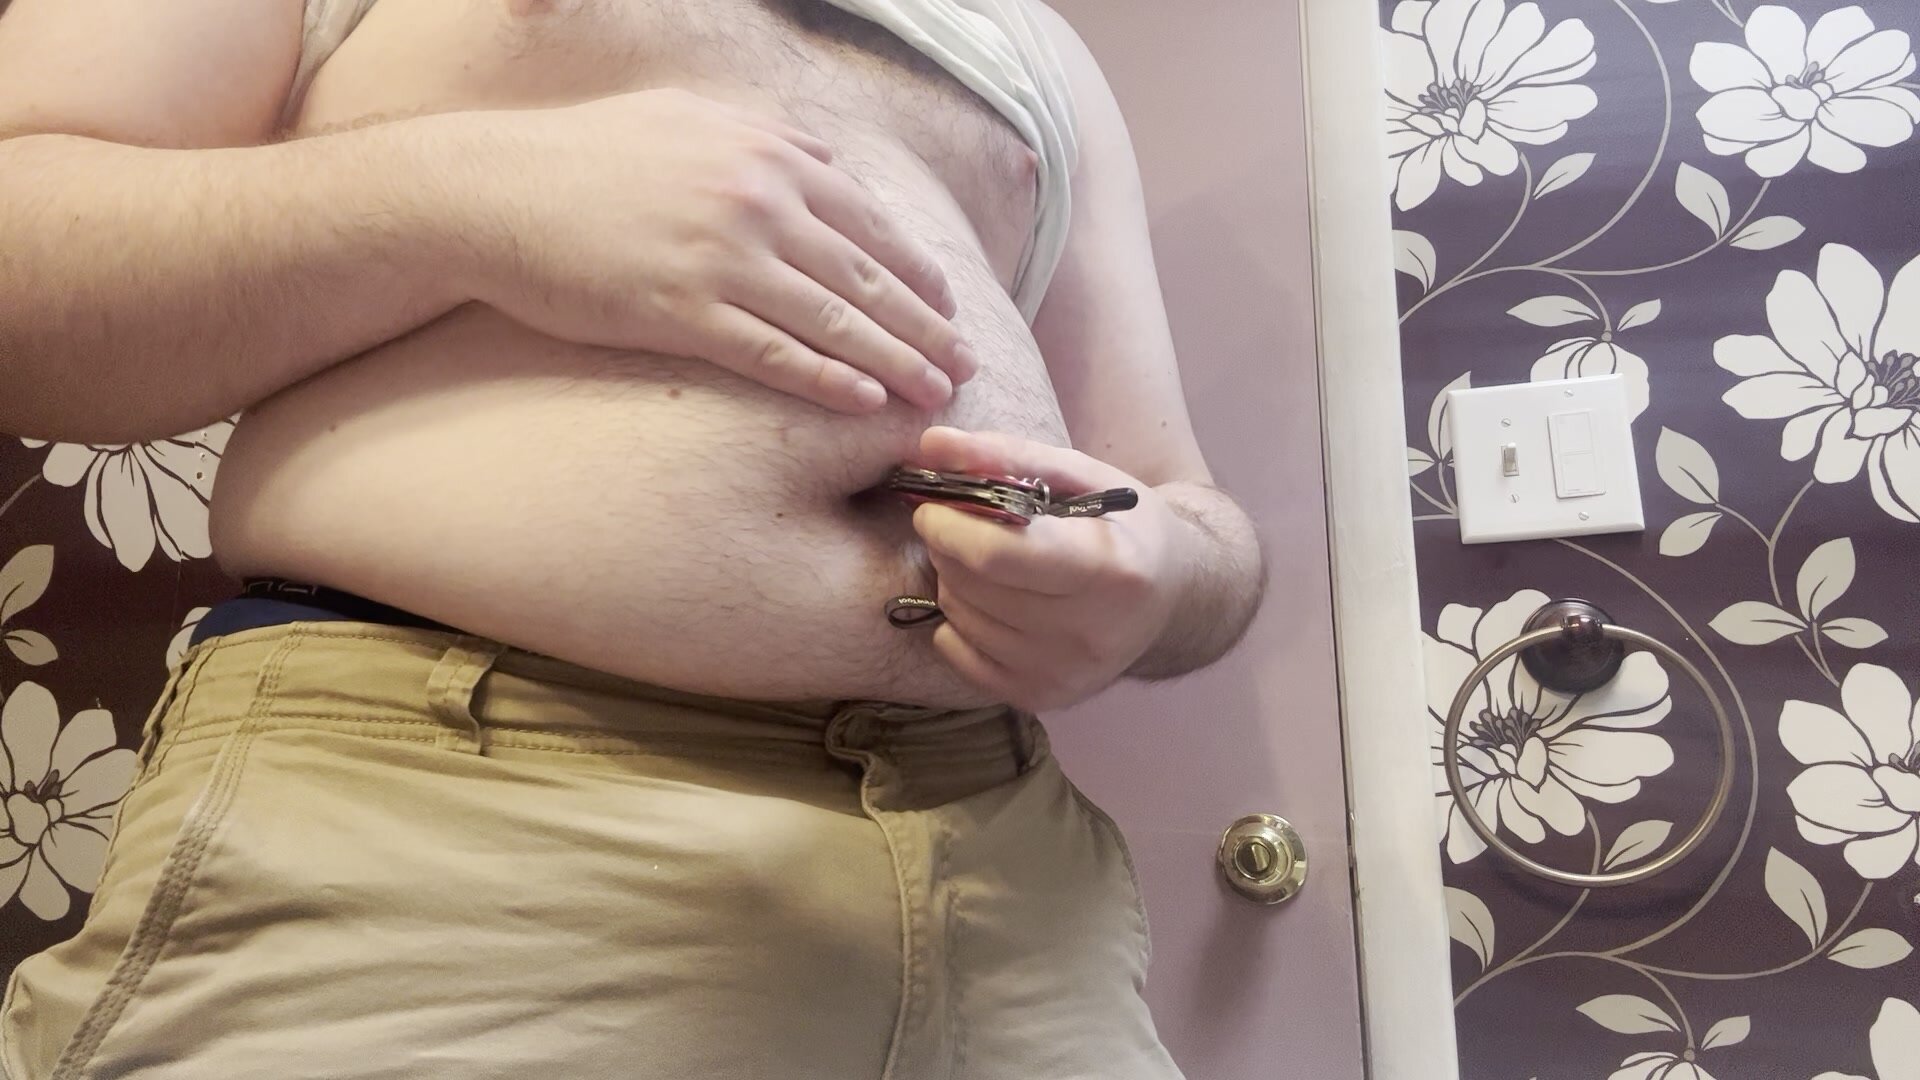 Fat gay guy stabs his belly button